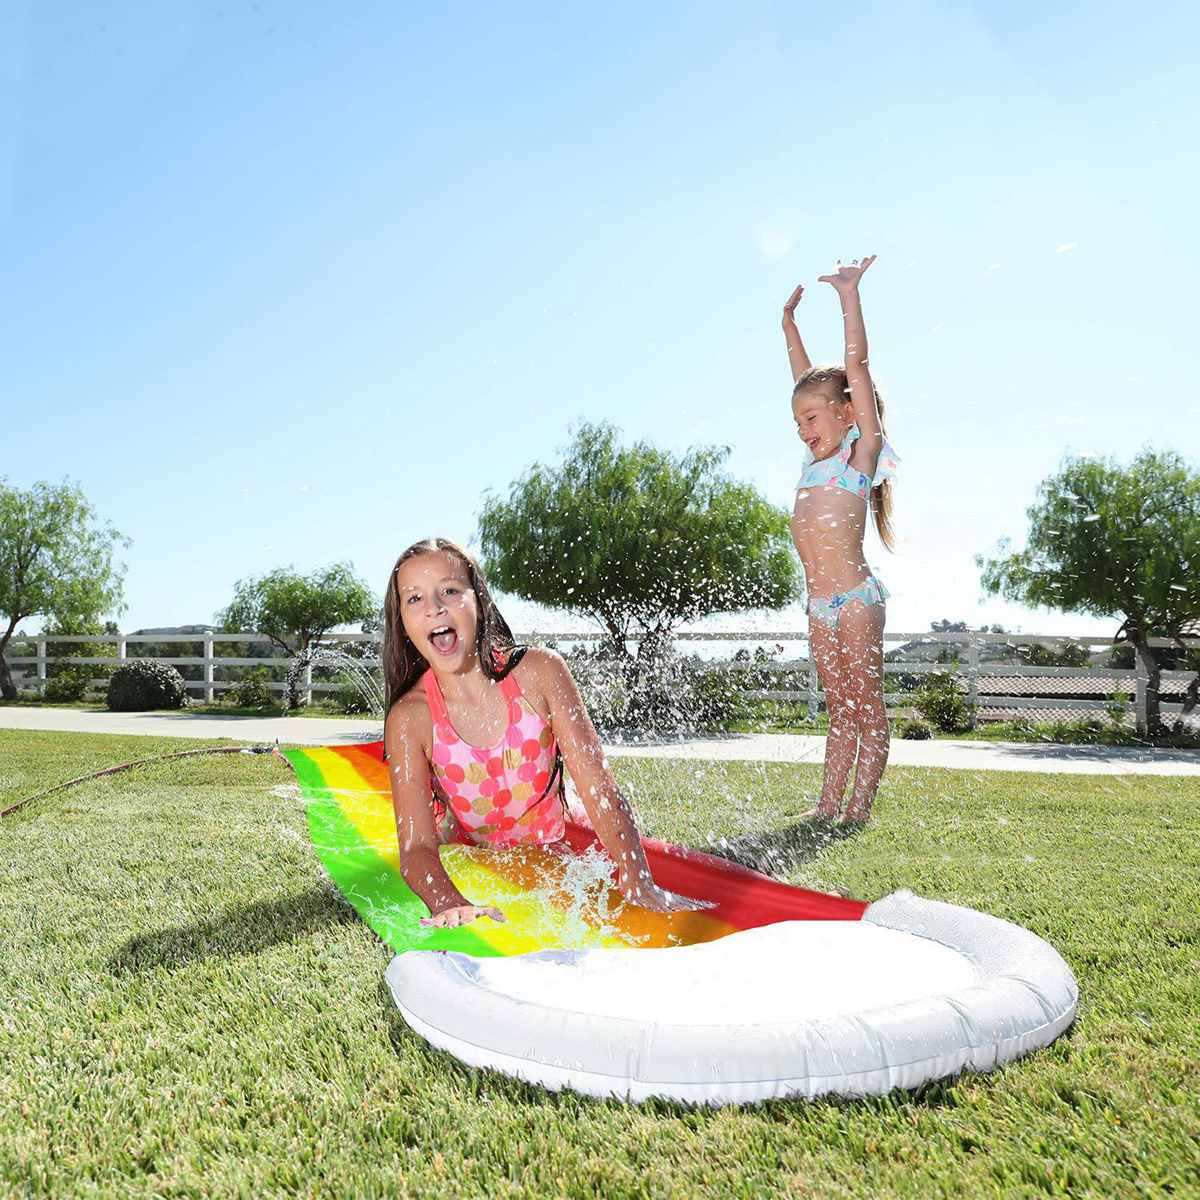 NEW-Giant-Surf-Water-Slide-Fun-Lawn-Water-Slides-Pools-For-Kids-Summer-PVC-Games-Center-3.jpg